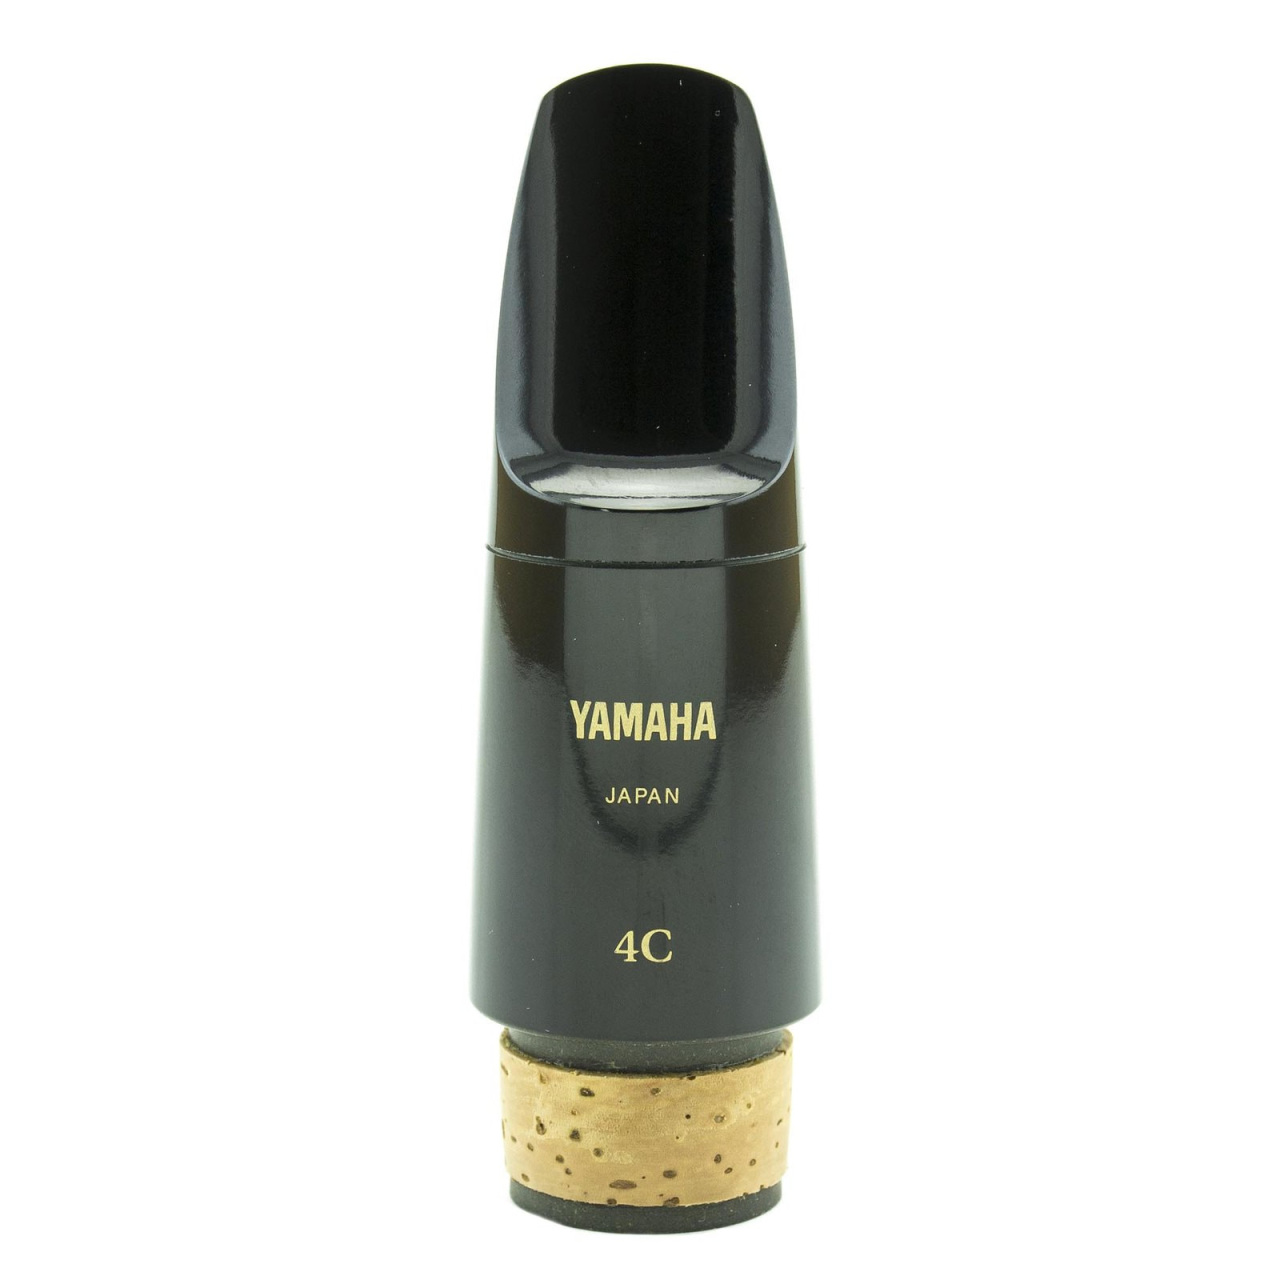 Yamaha Clarinet Mouthpieces - IN TUNE MUSIC 02 9439 1143